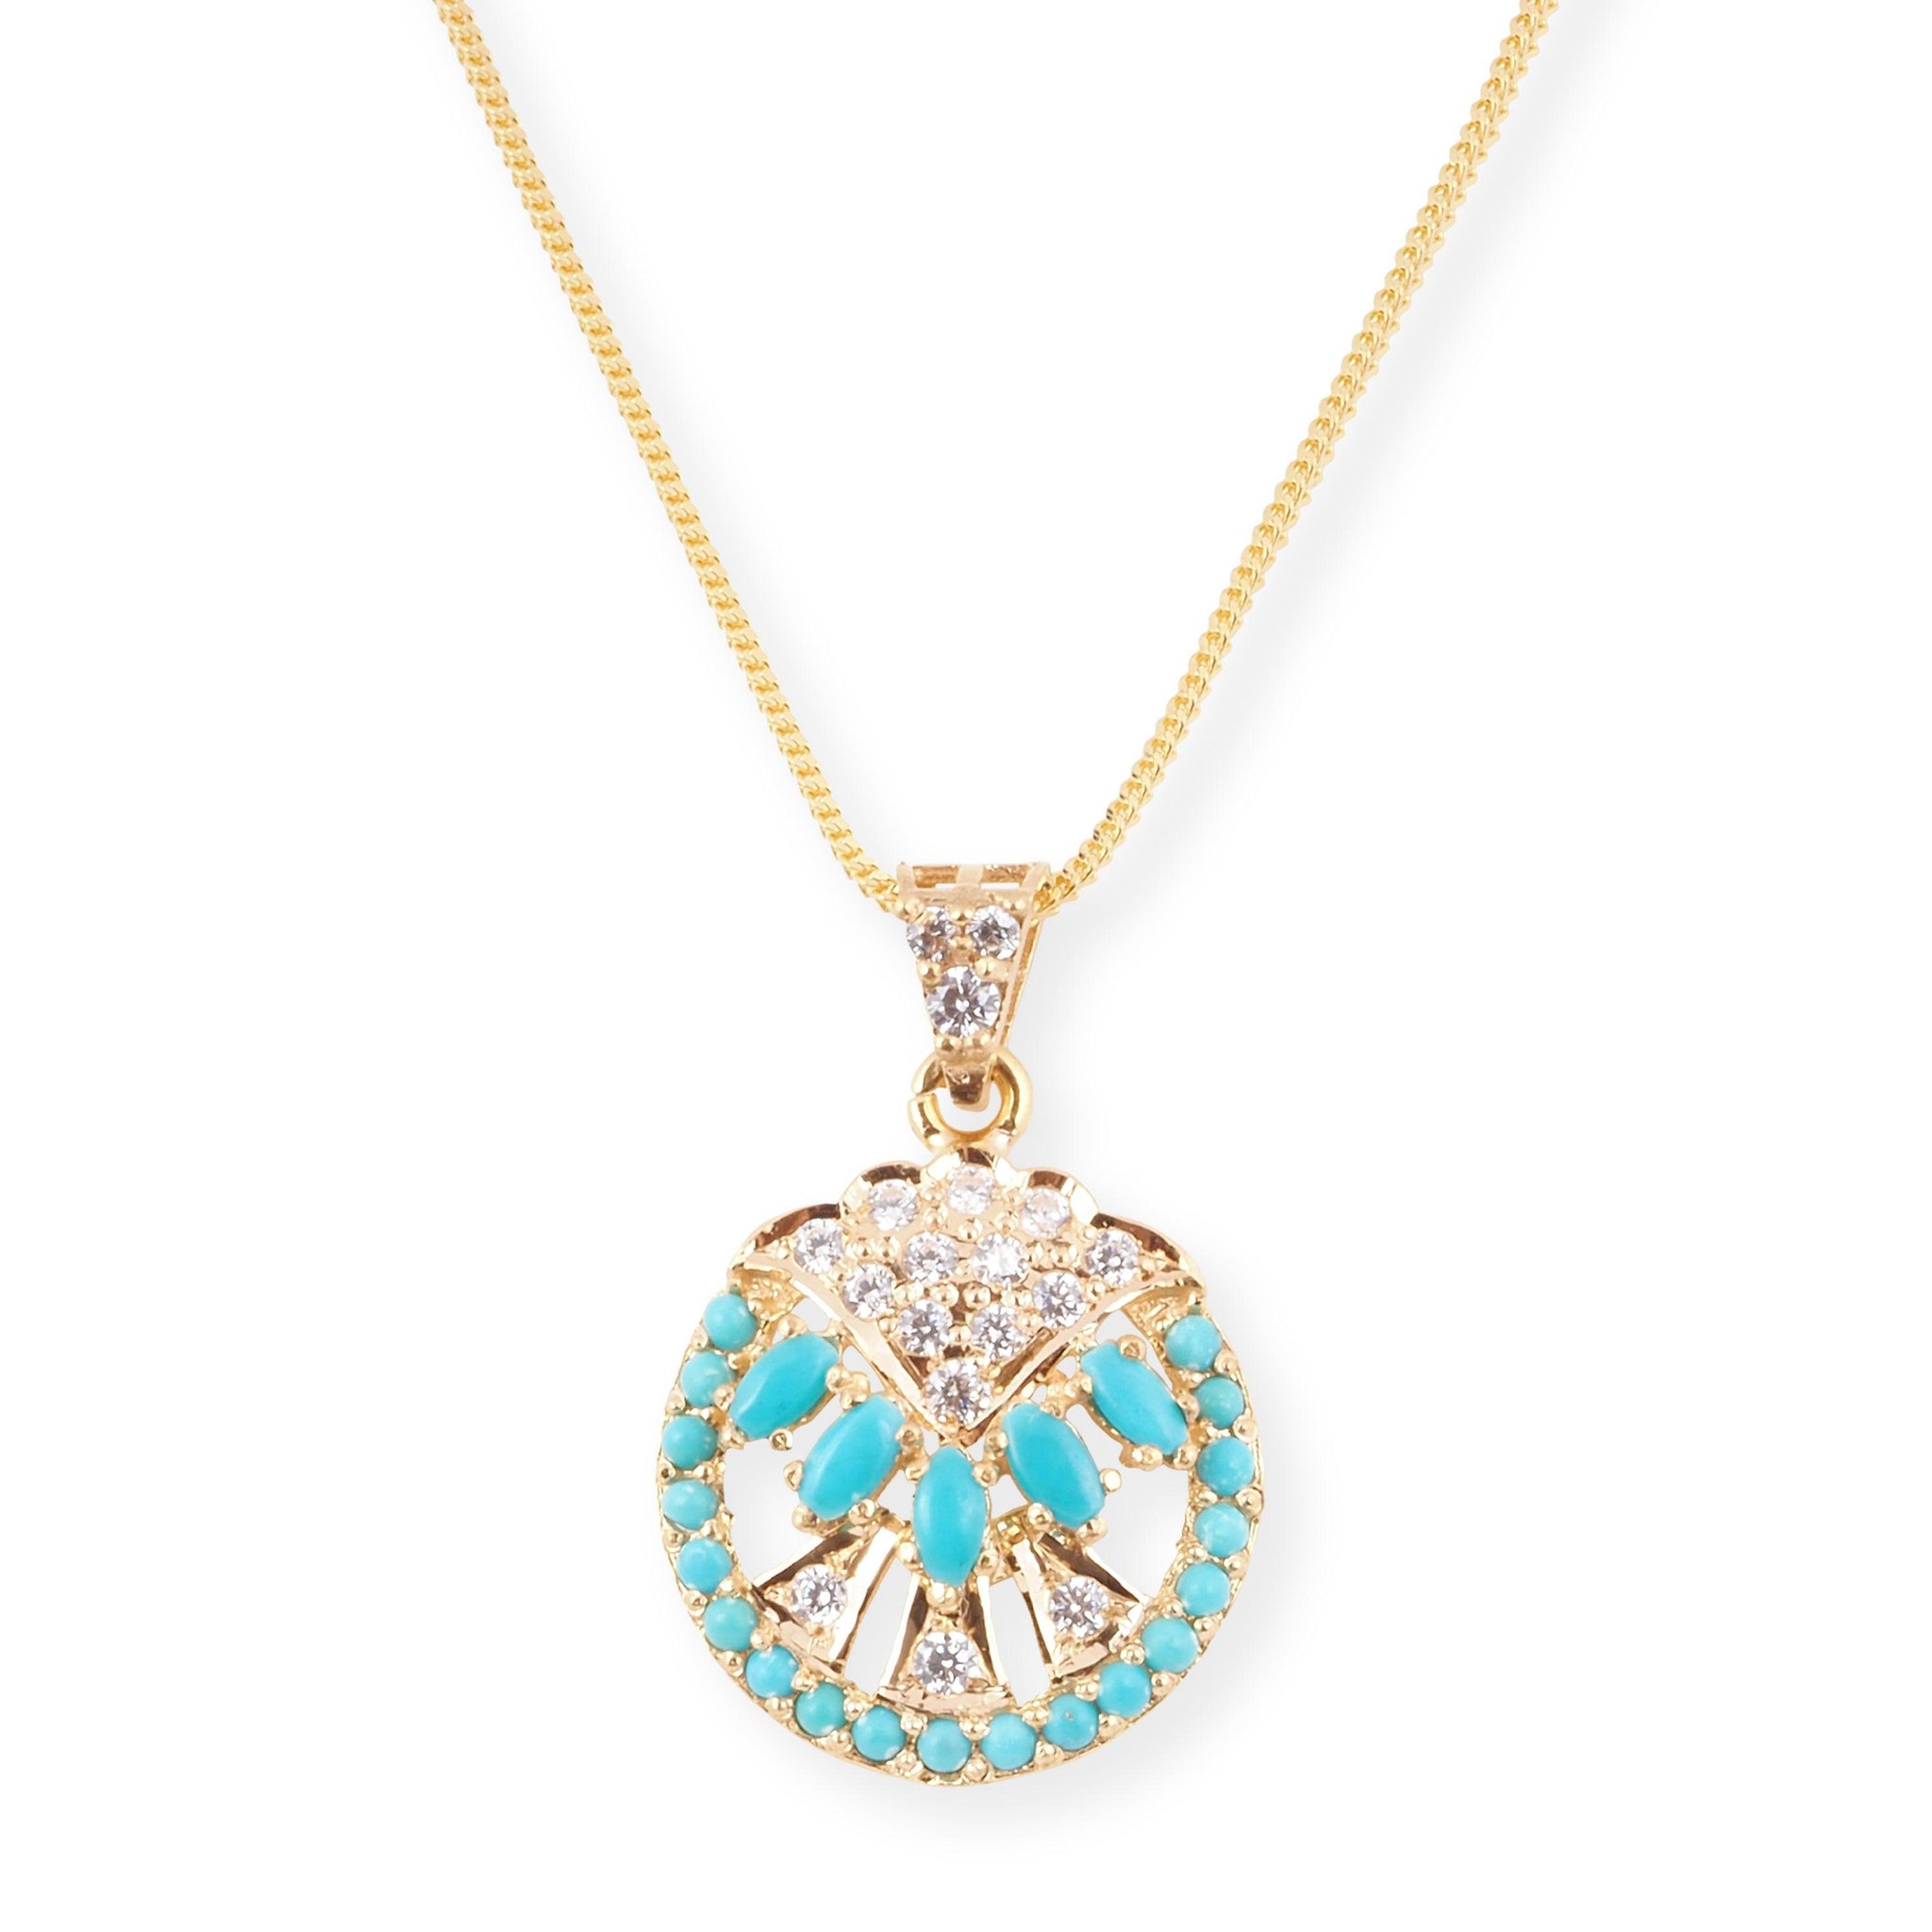 22ct Gold Set with Turquoise and Cubic Zirconia Stones (Pendant + Chain + Earrings) PE-8008